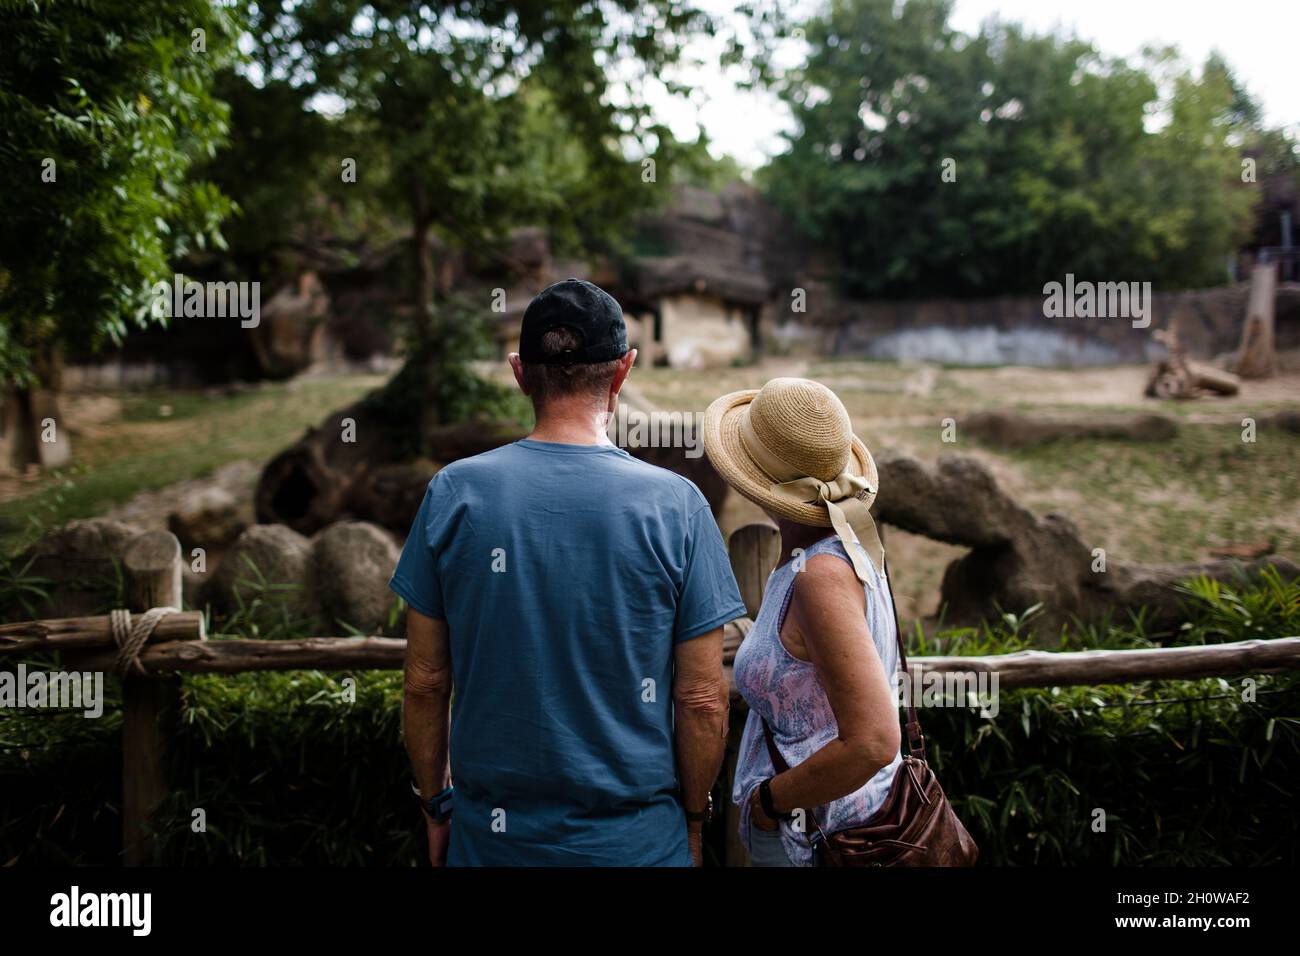 Man with Dementia Standing with Wife at Cincinnati Zoo Stock Photo